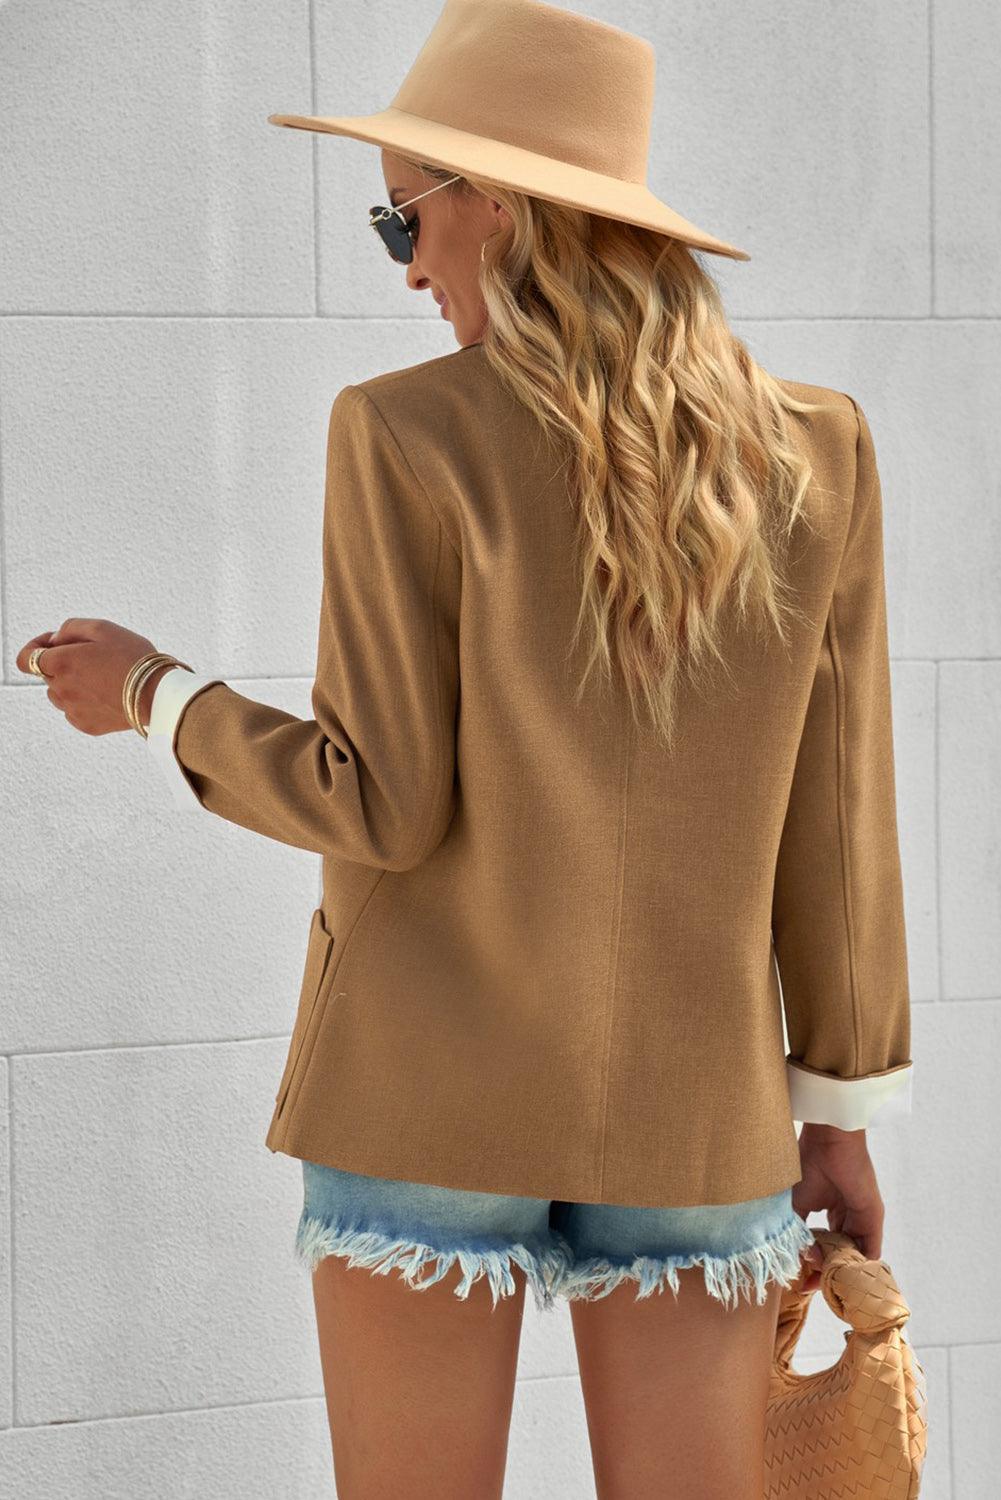 Women's Casual Double Breasted Blazer with Pockets - MXSTUDIO.COM